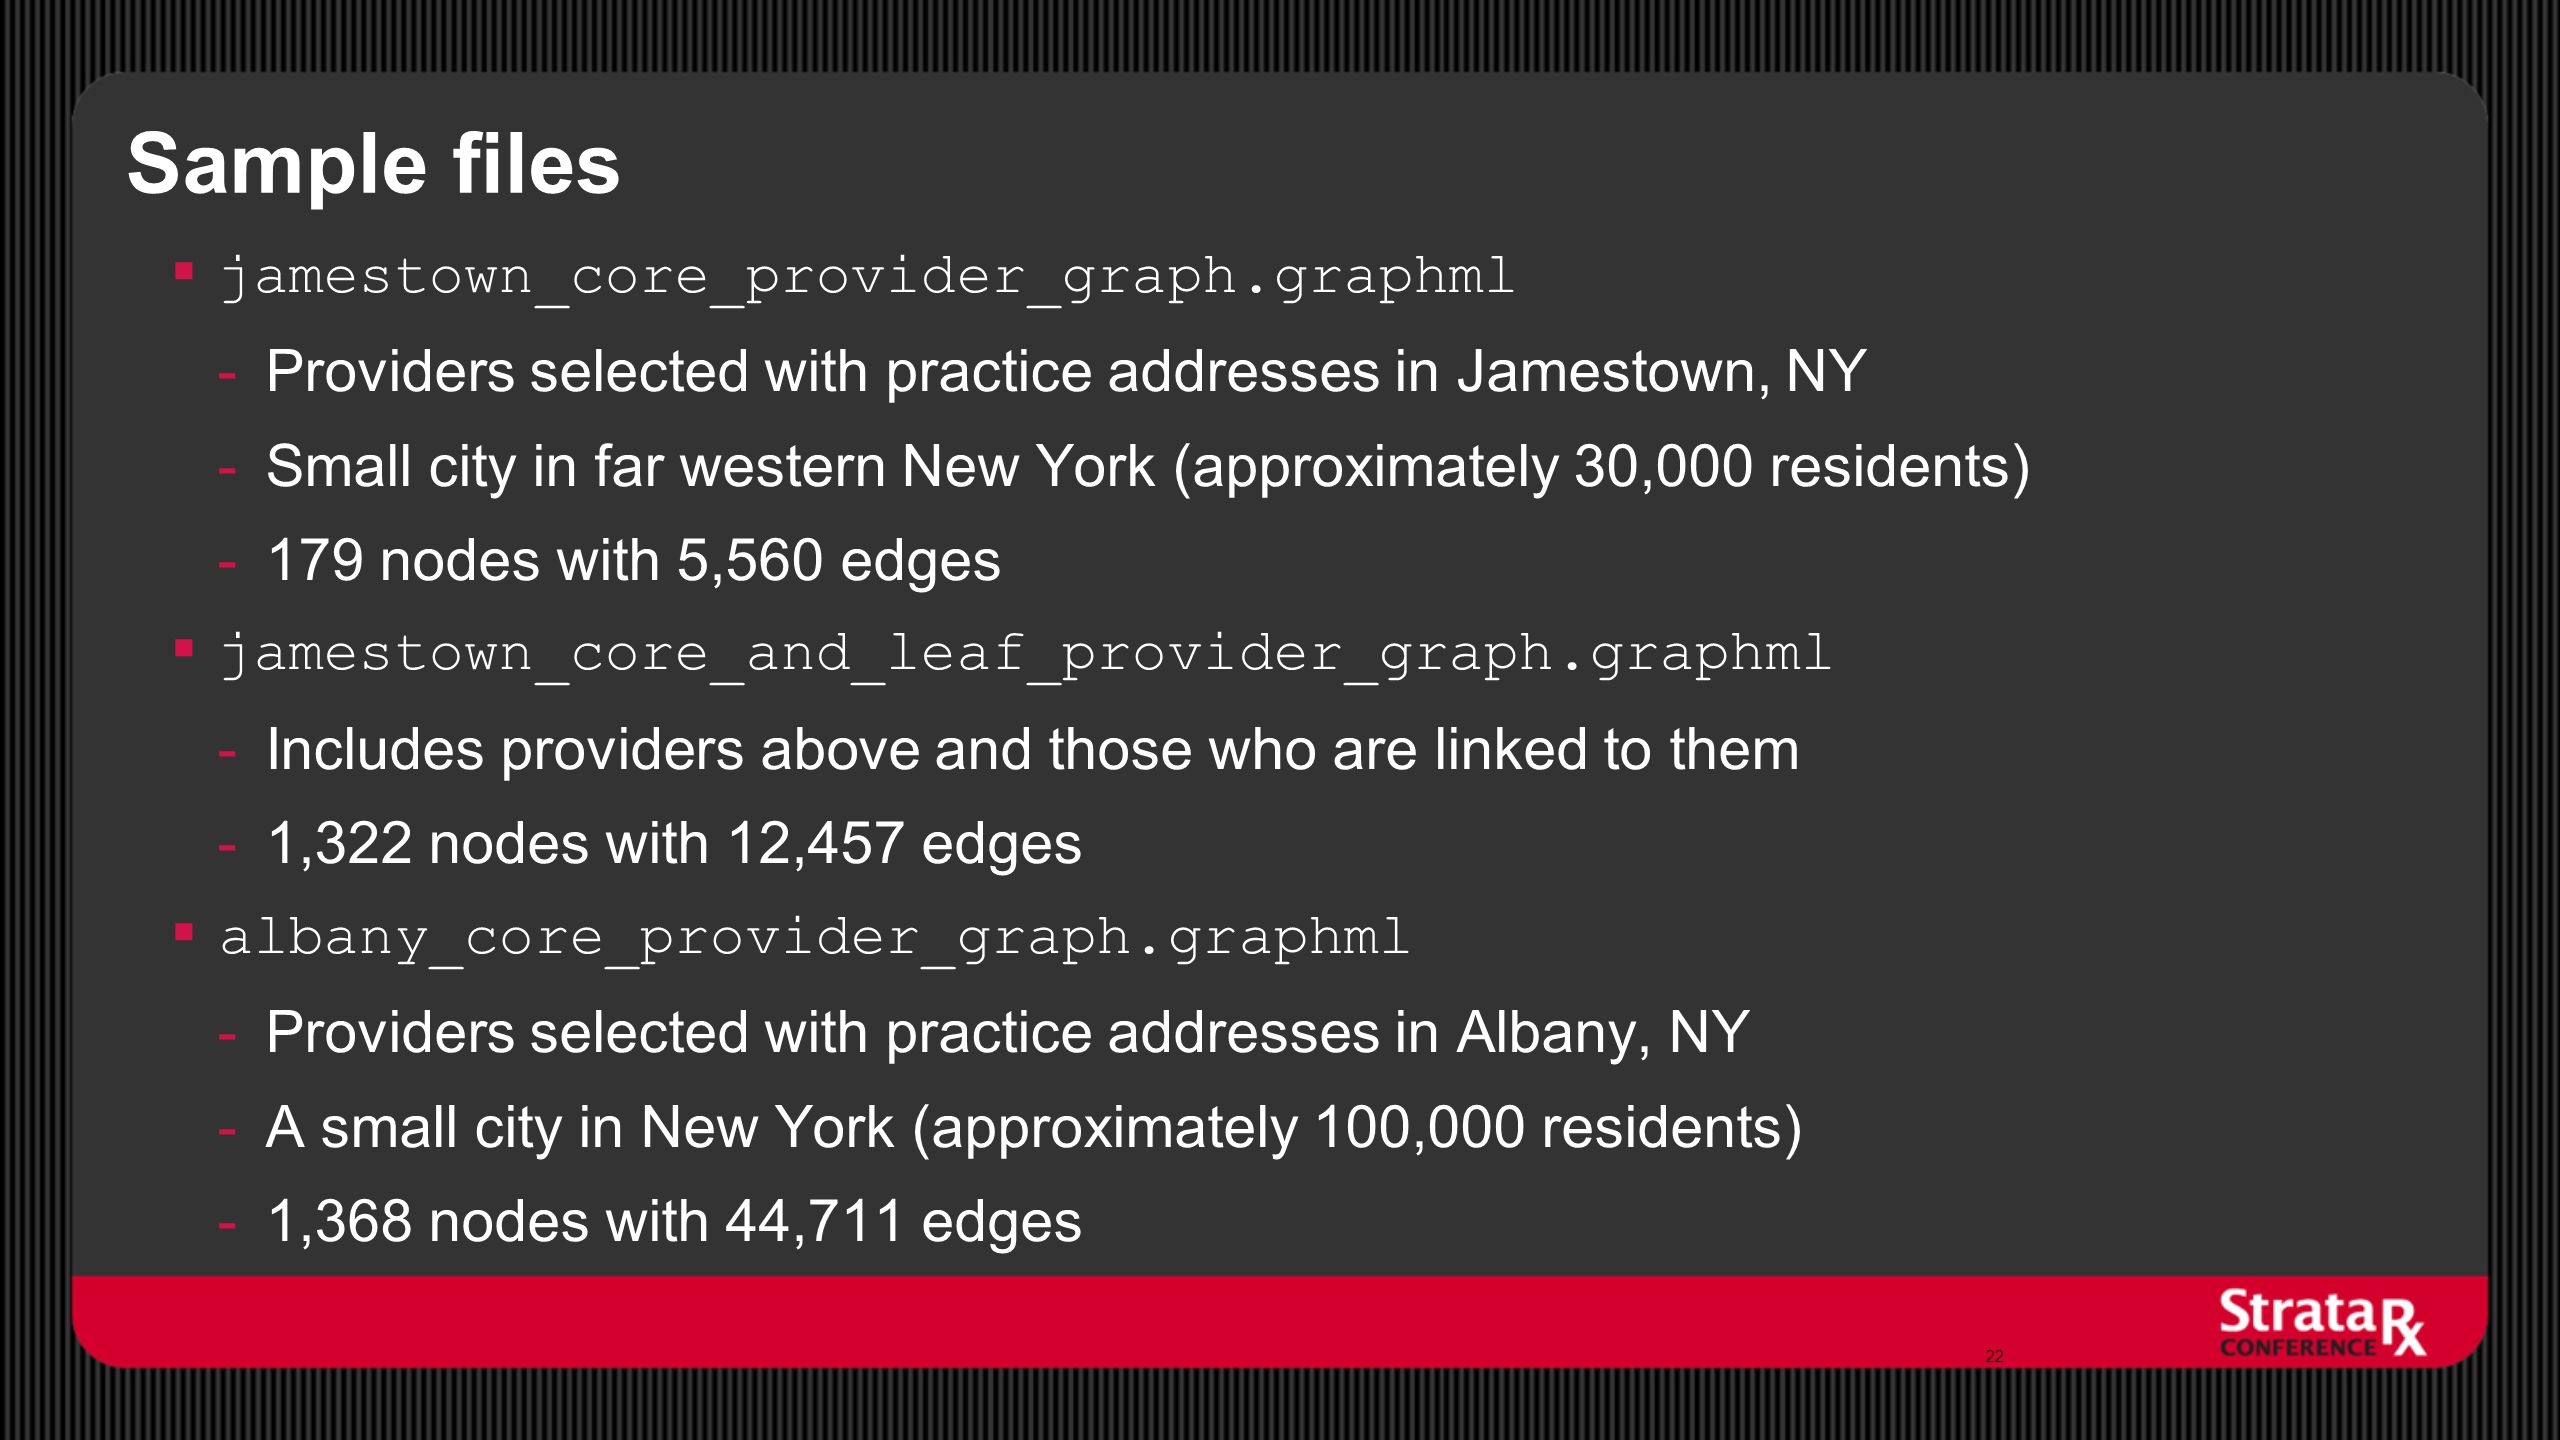 Sample files  jamestown_core_provider_graph.graphml -Providers selected with practice addresses in Jamestown, NY -Small city in far western New York (approximately 30,000 residents) -179 nodes with 5,560 edges  jamestown_core_and_leaf_provider_graph.graphml -Includes providers above and those who are linked to them -1,322 nodes with 12,457 edges  albany_core_provider_graph.graphml -Providers selected with practice addresses in Albany, NY -A small city in New York (approximately 100,000 residents) -1,368 nodes with 44,711 edges 22